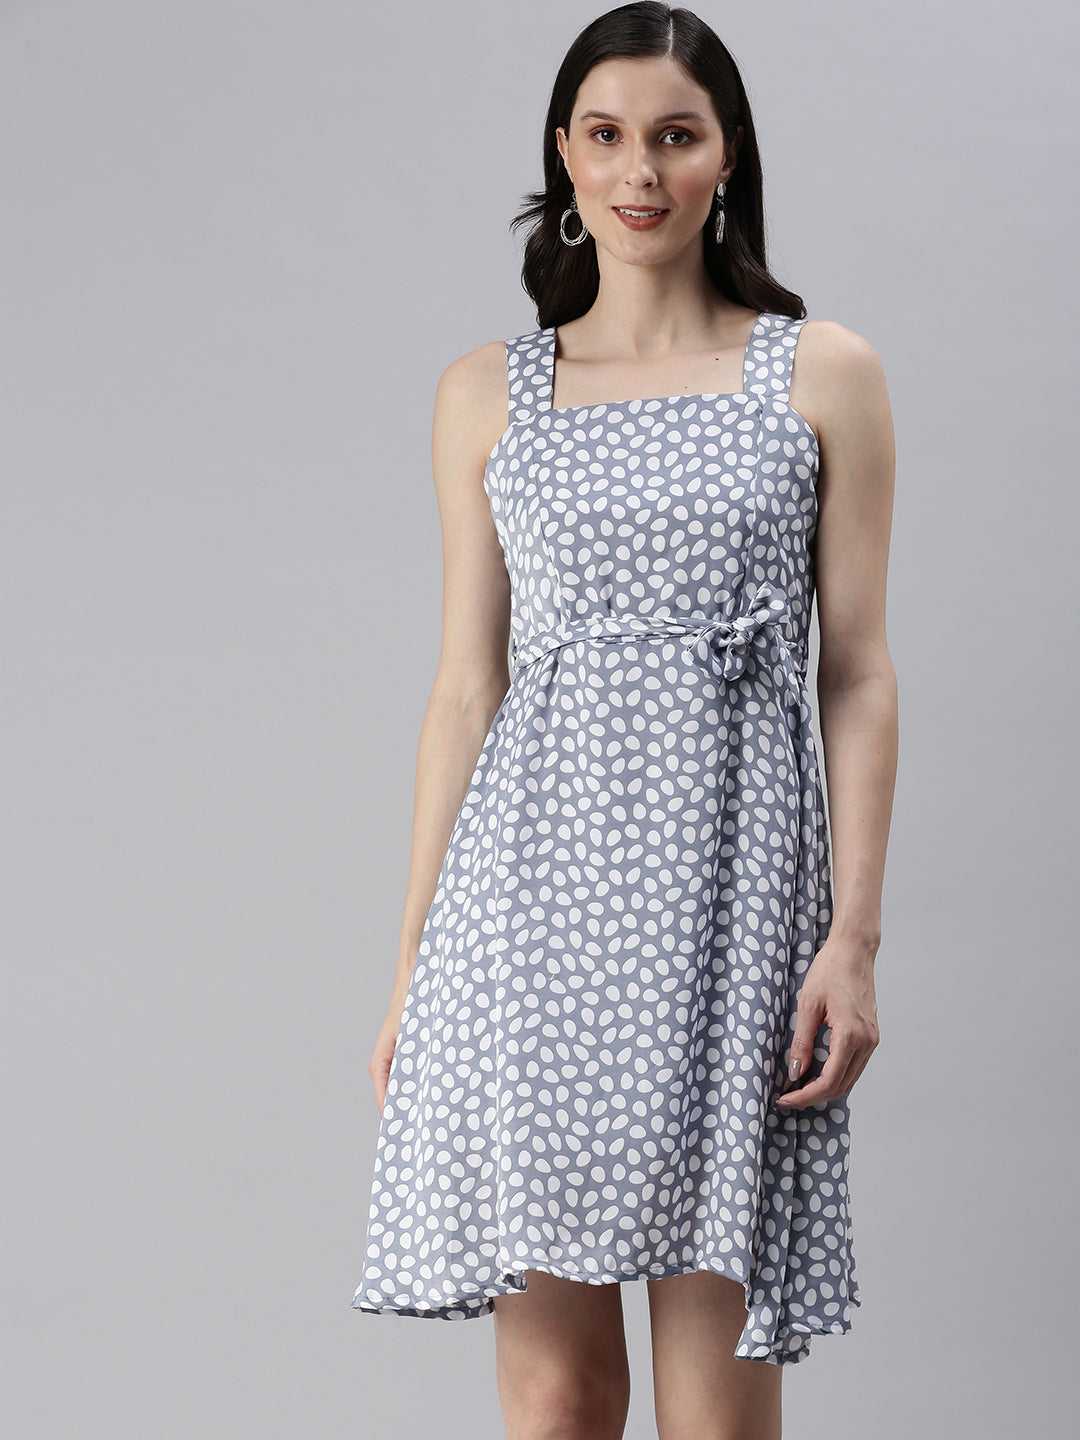 Women's Polka Dots Blue Fit and Flare Dress